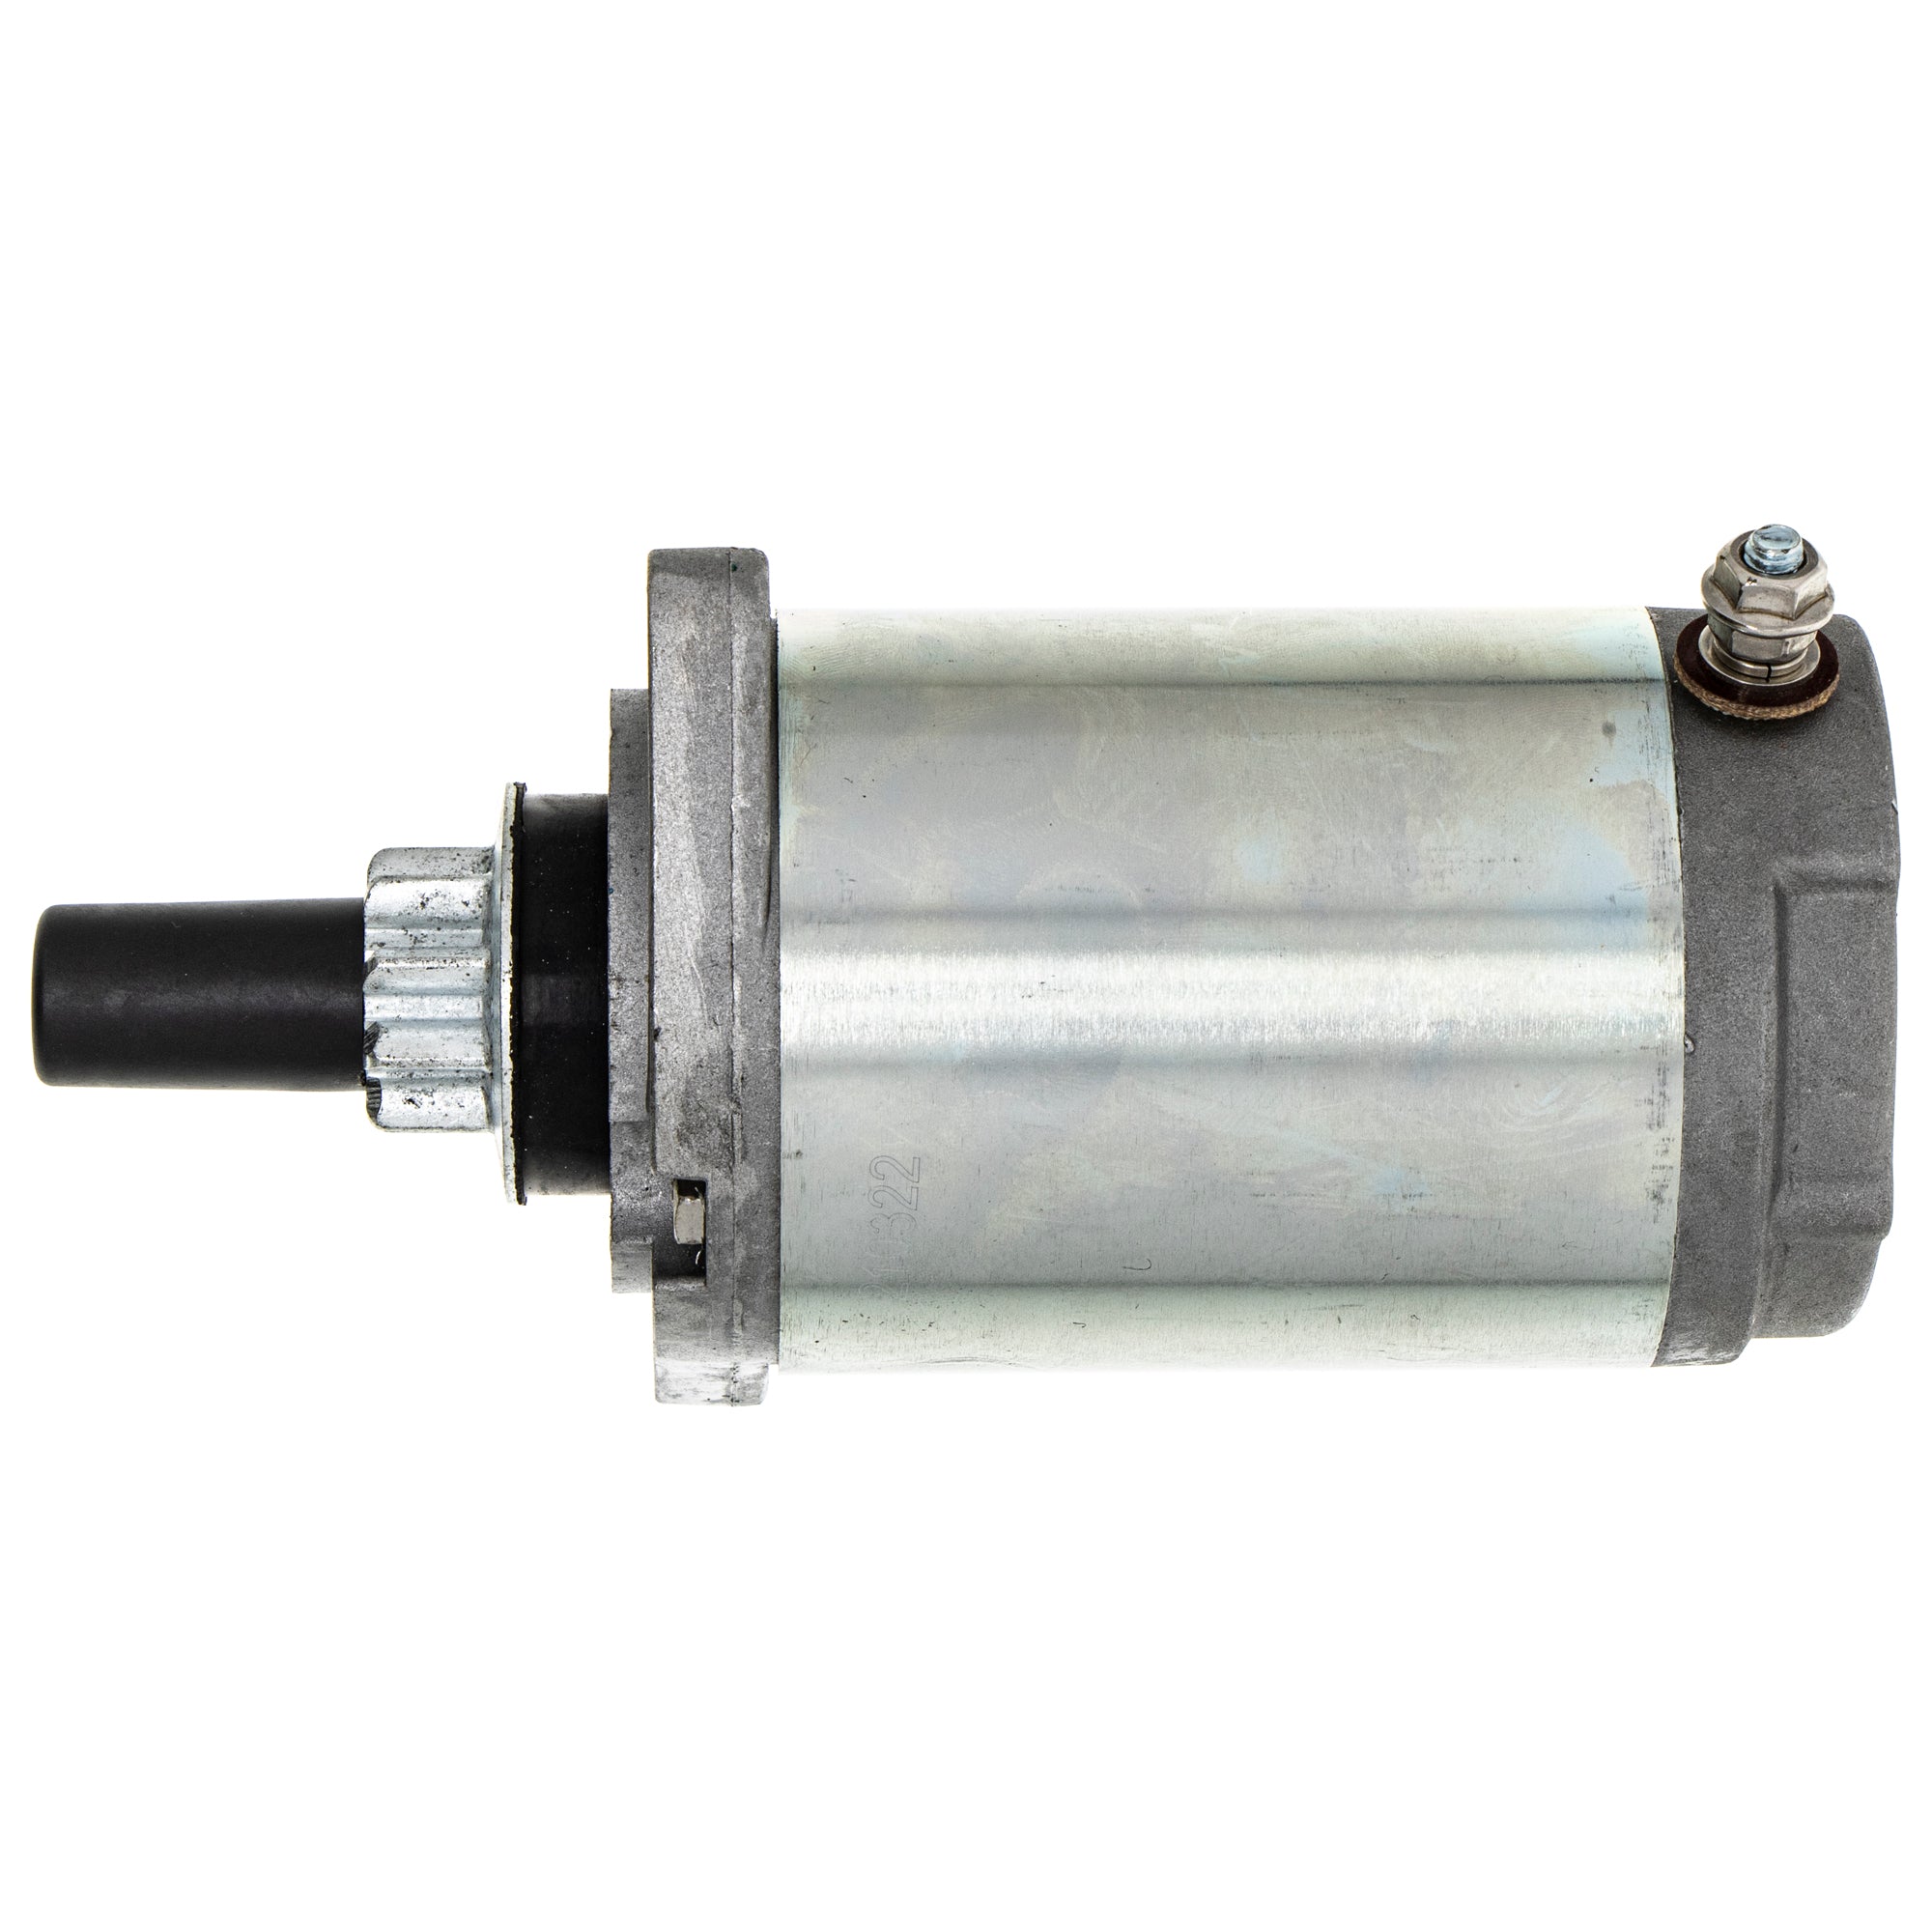 NICHE 519-CSM2330O Starter Motor Assembly for zOTHER Polaris XLT XC